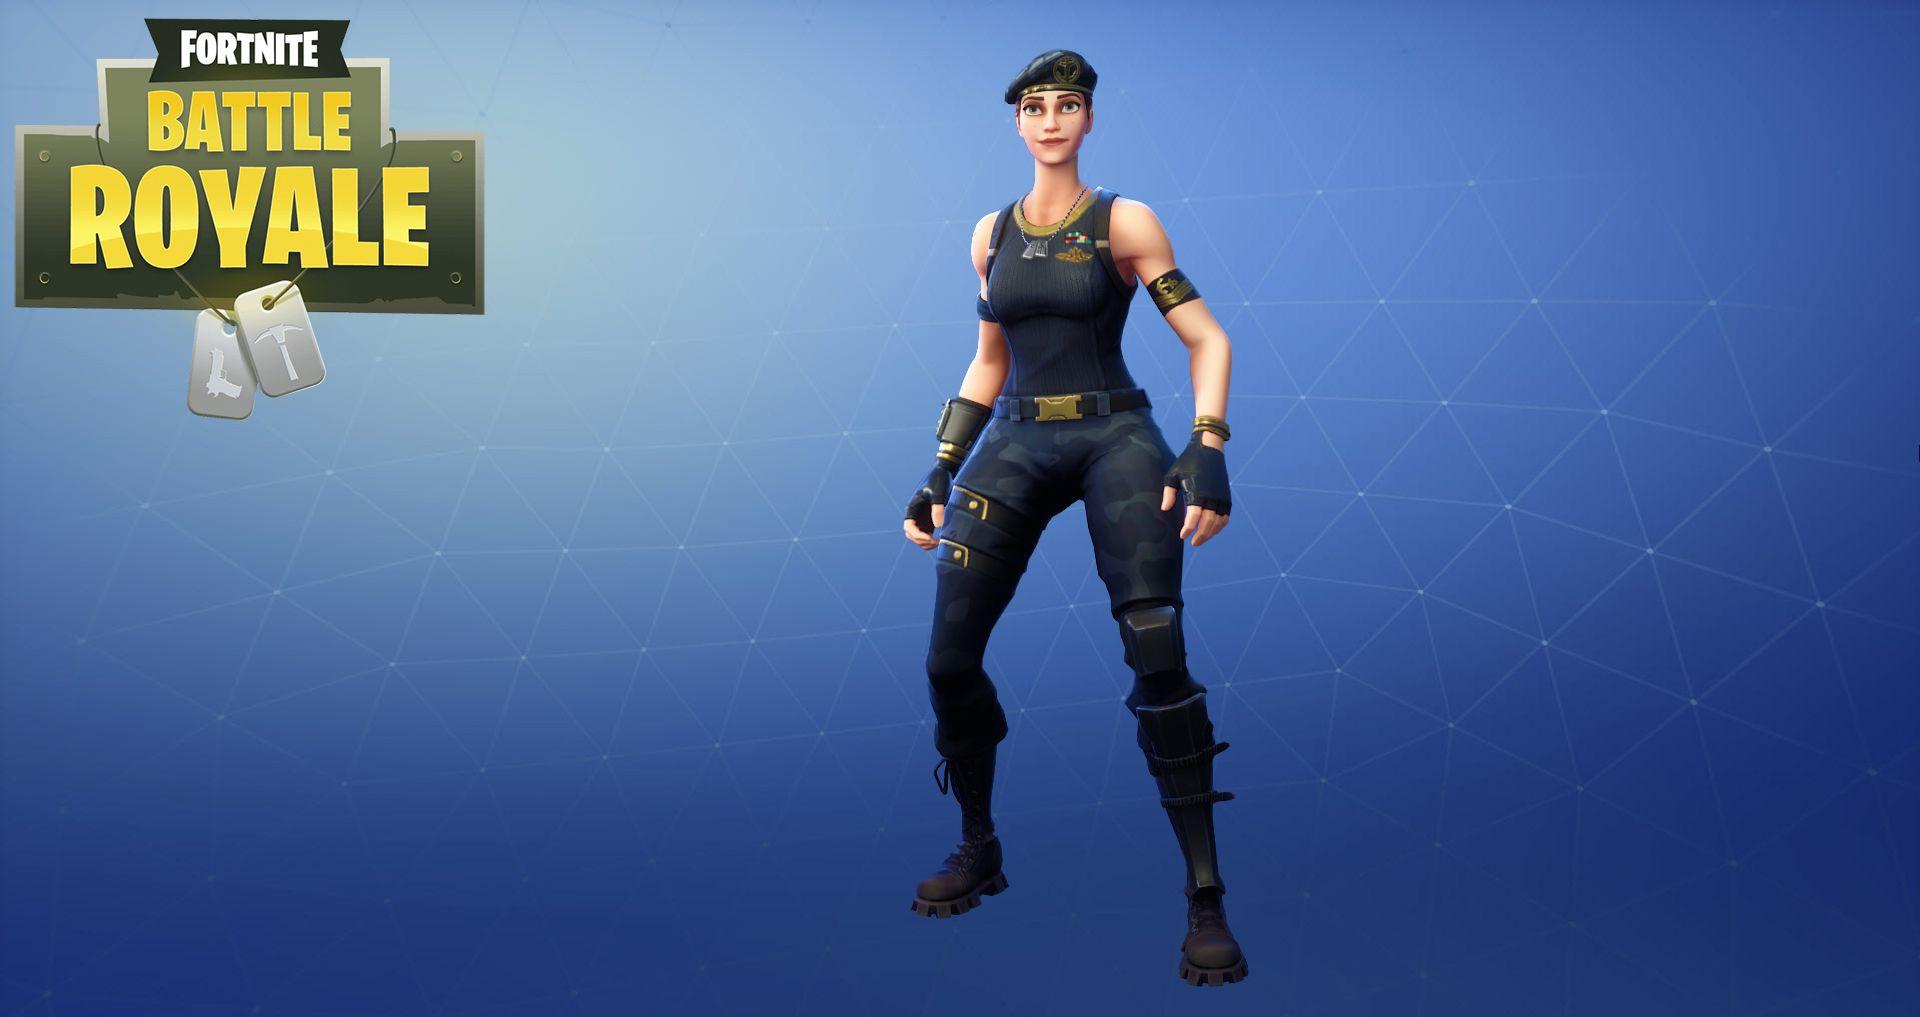 Brawler Fortnite Outfit Skin How to Get + Updates